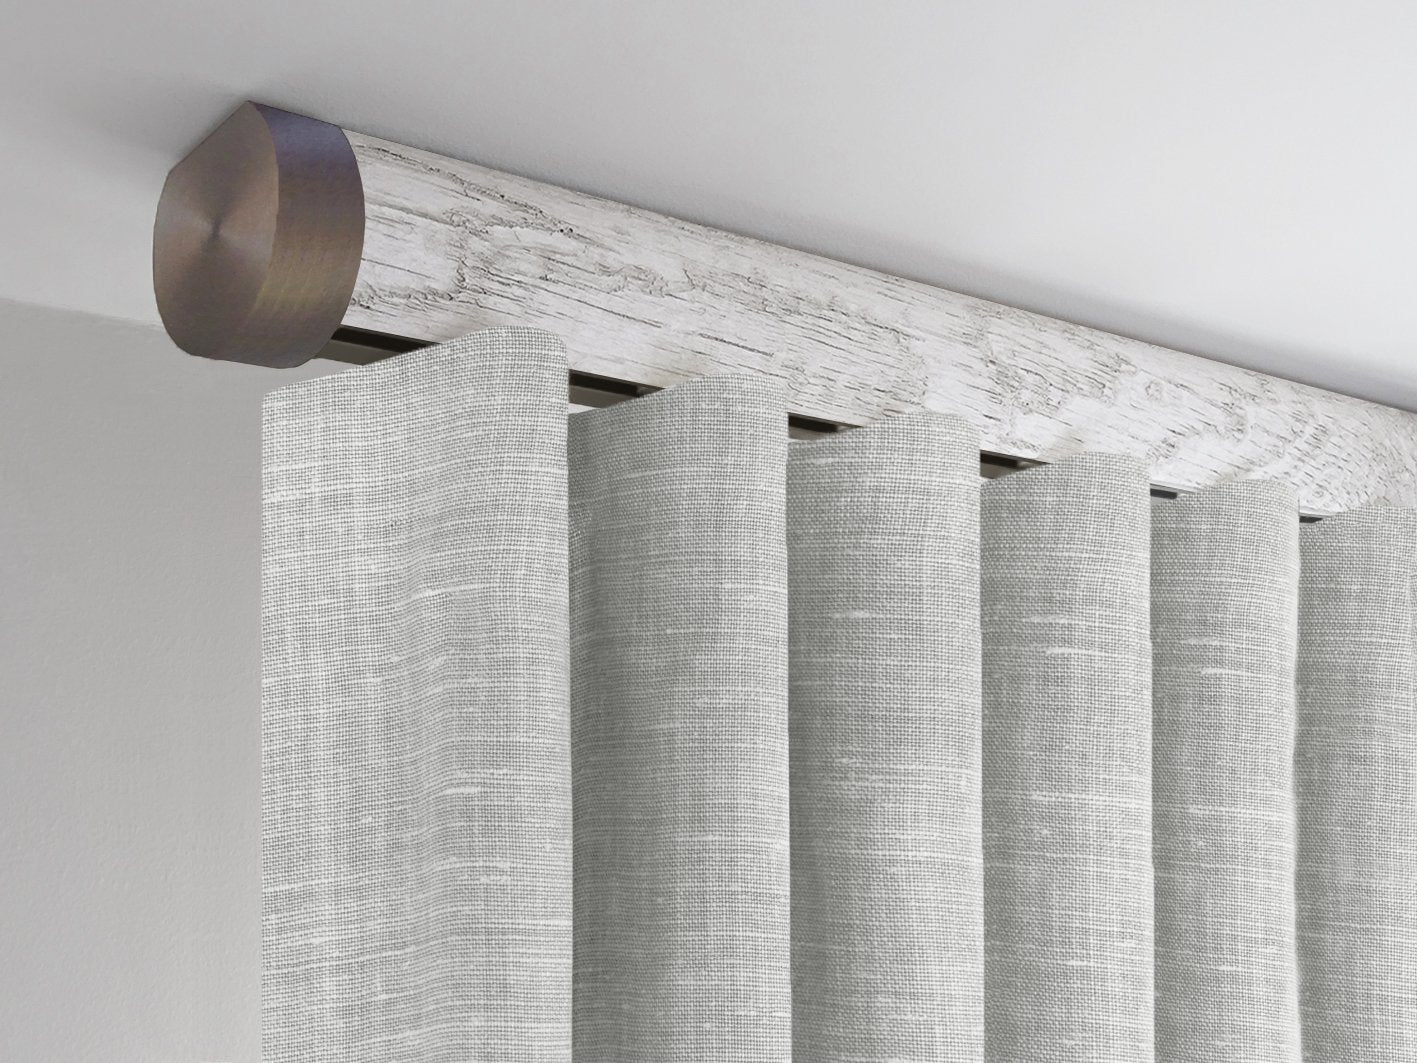 Flush ceiling fix curtain pole set in nordic white by Walcot House